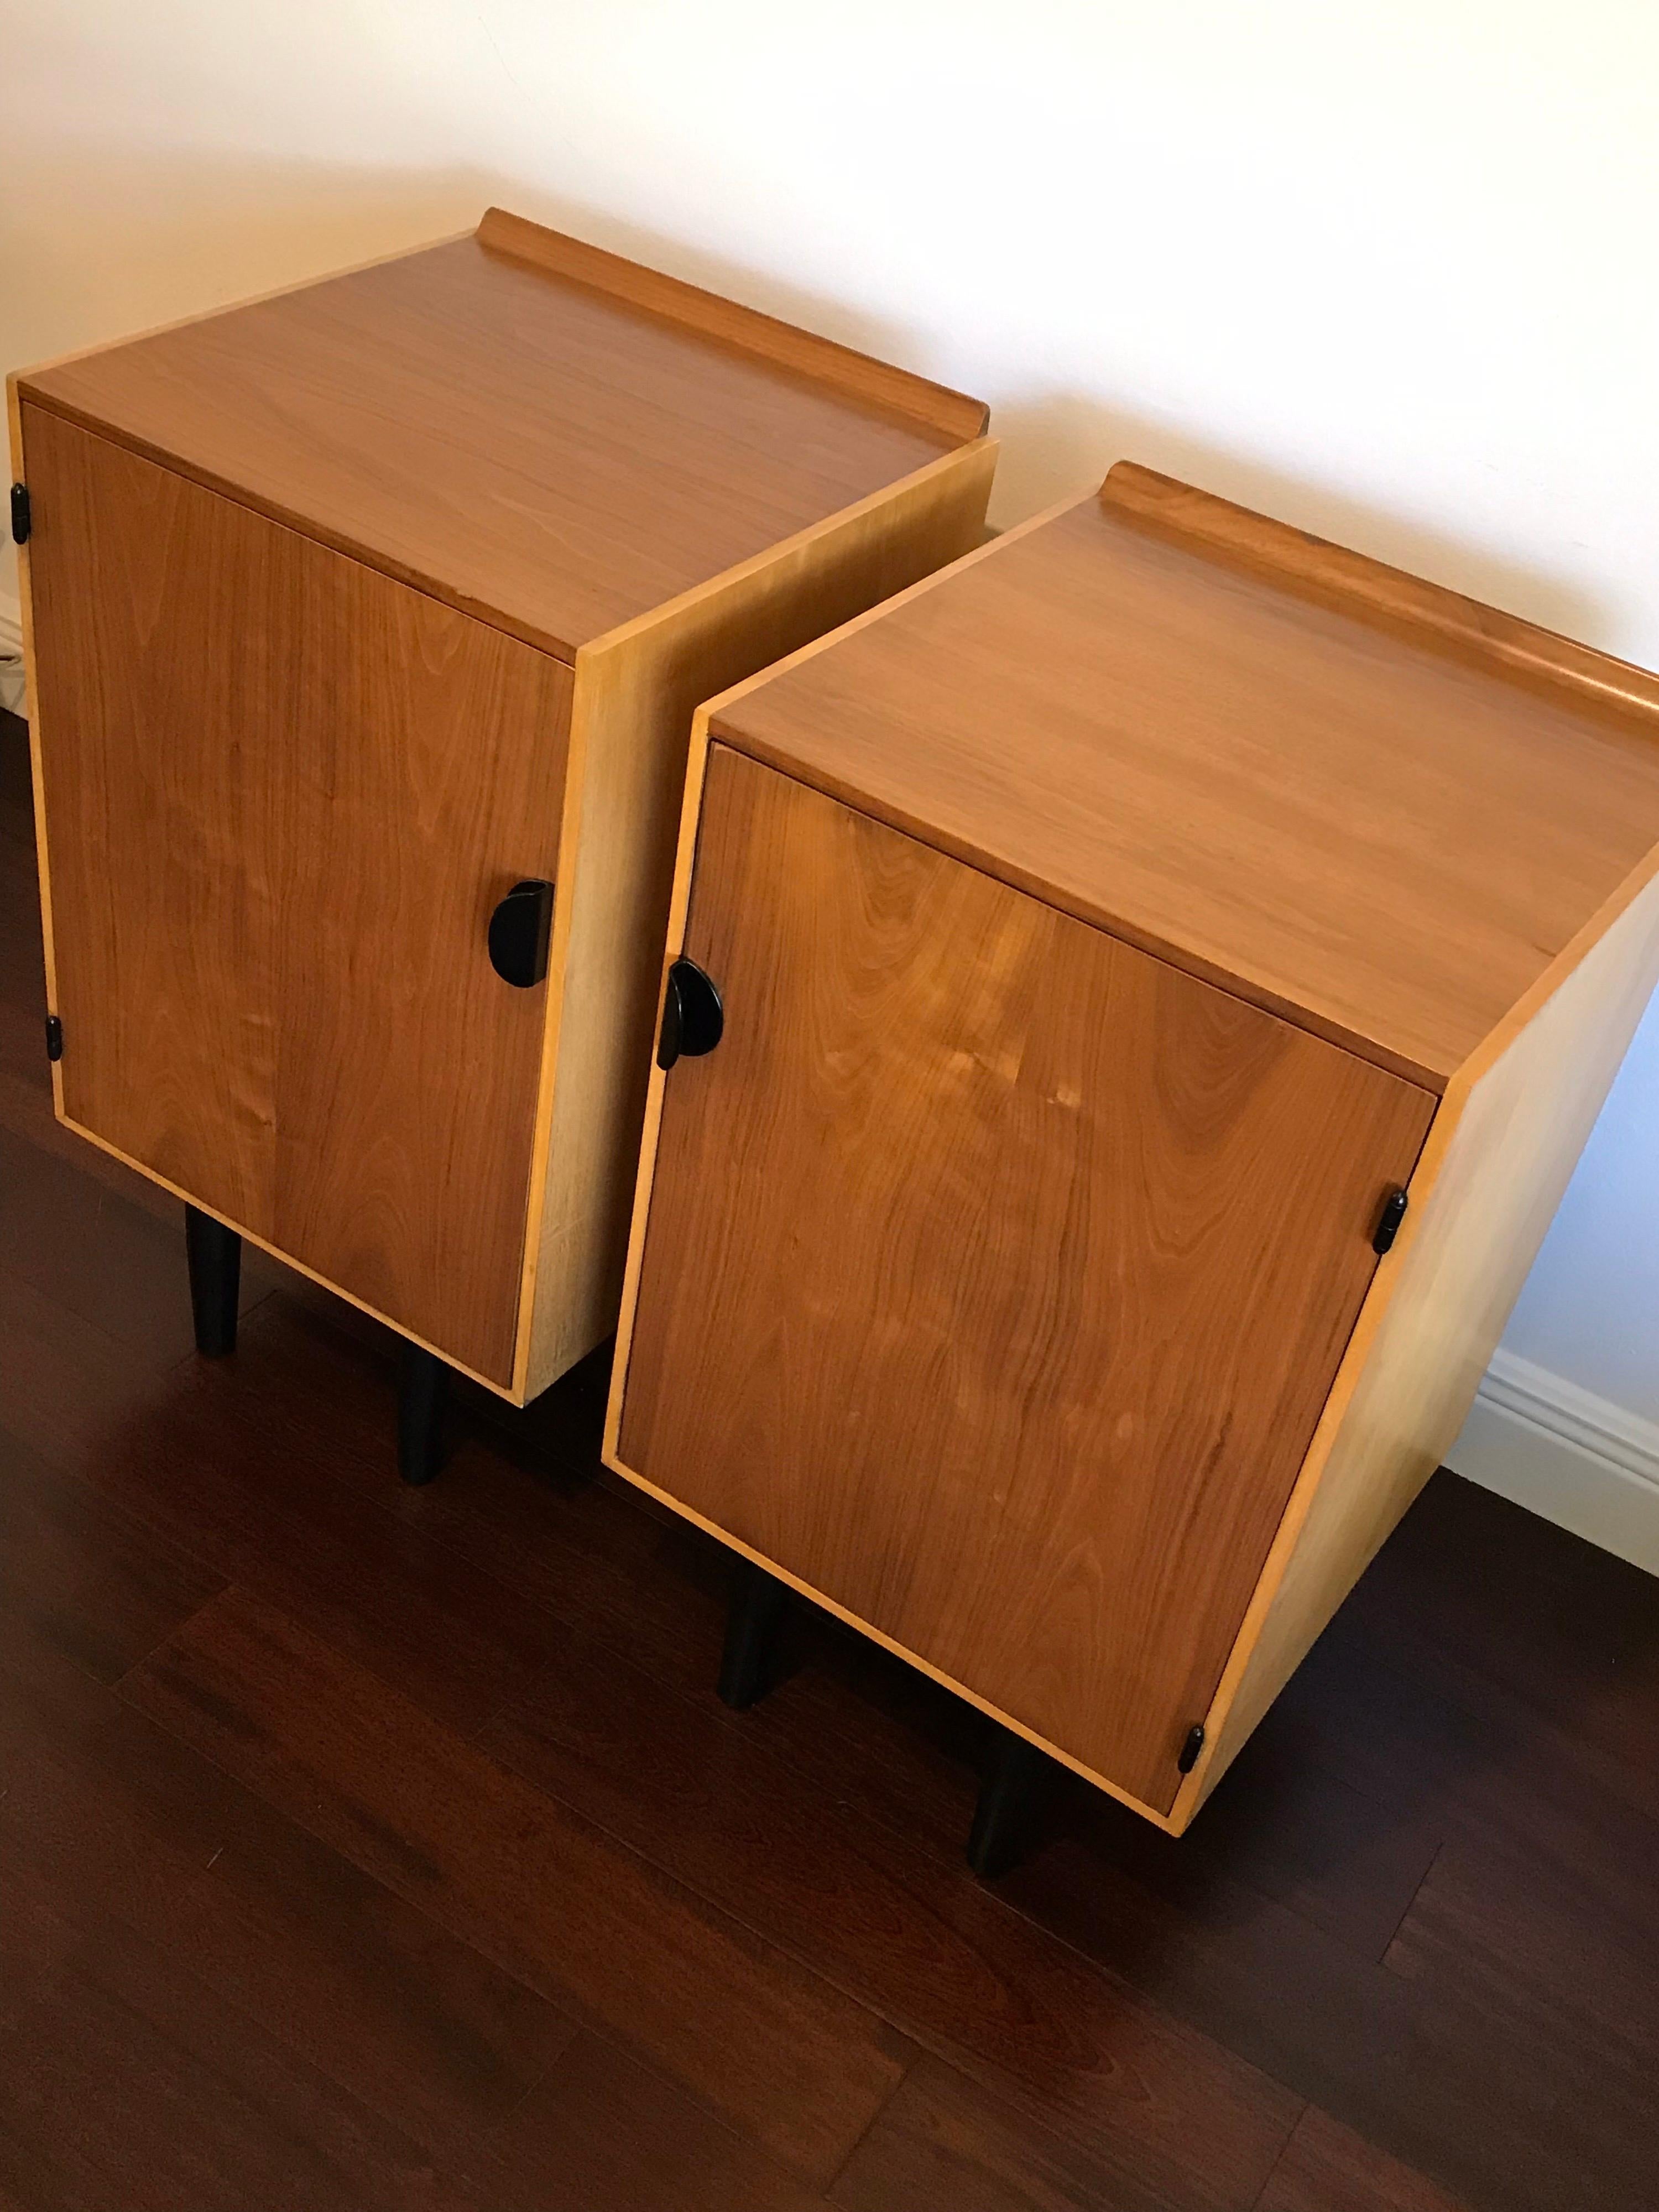 Very rare nightstands or cabinets by Finn Juhl for Baker. These are two-tone with walnut tops and fronts, and birch sides. Each nightstand is accompanied by two drawers and a shelf, which are interchangeable. Very good condition. One cabinet has a